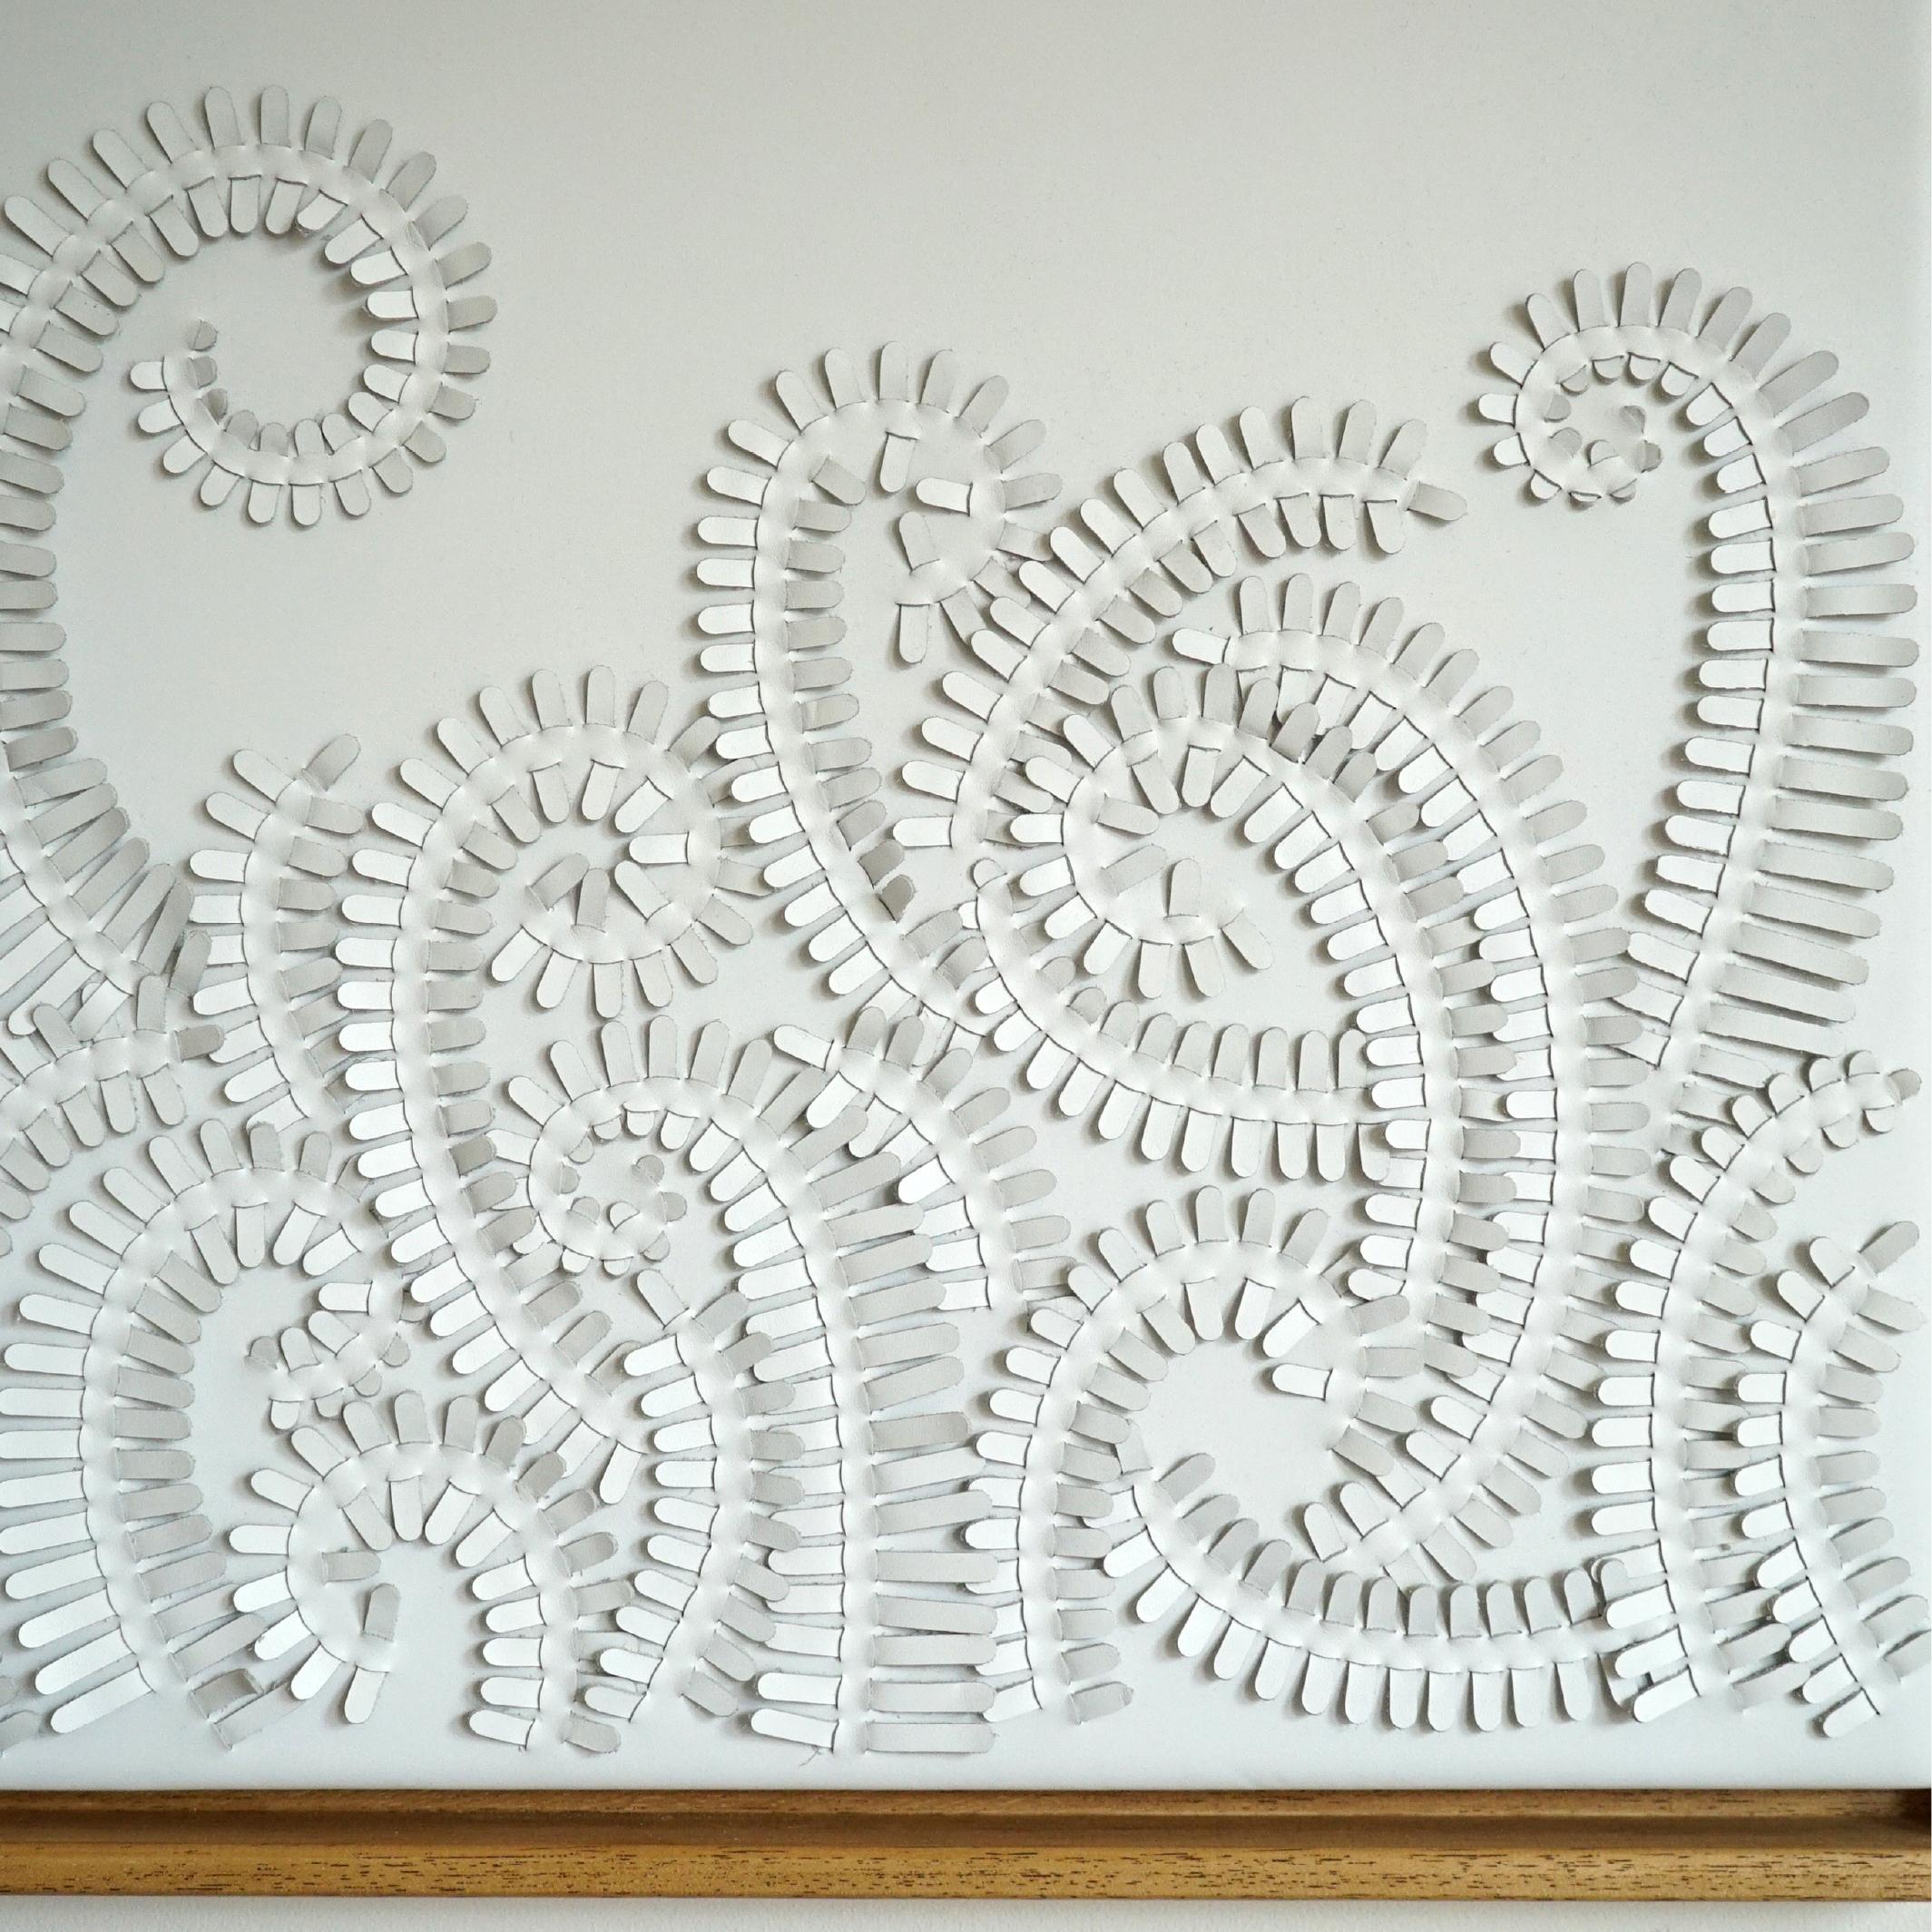 Other Fern: A Piece of 3D Sculptural White Leather Wall Art For Sale